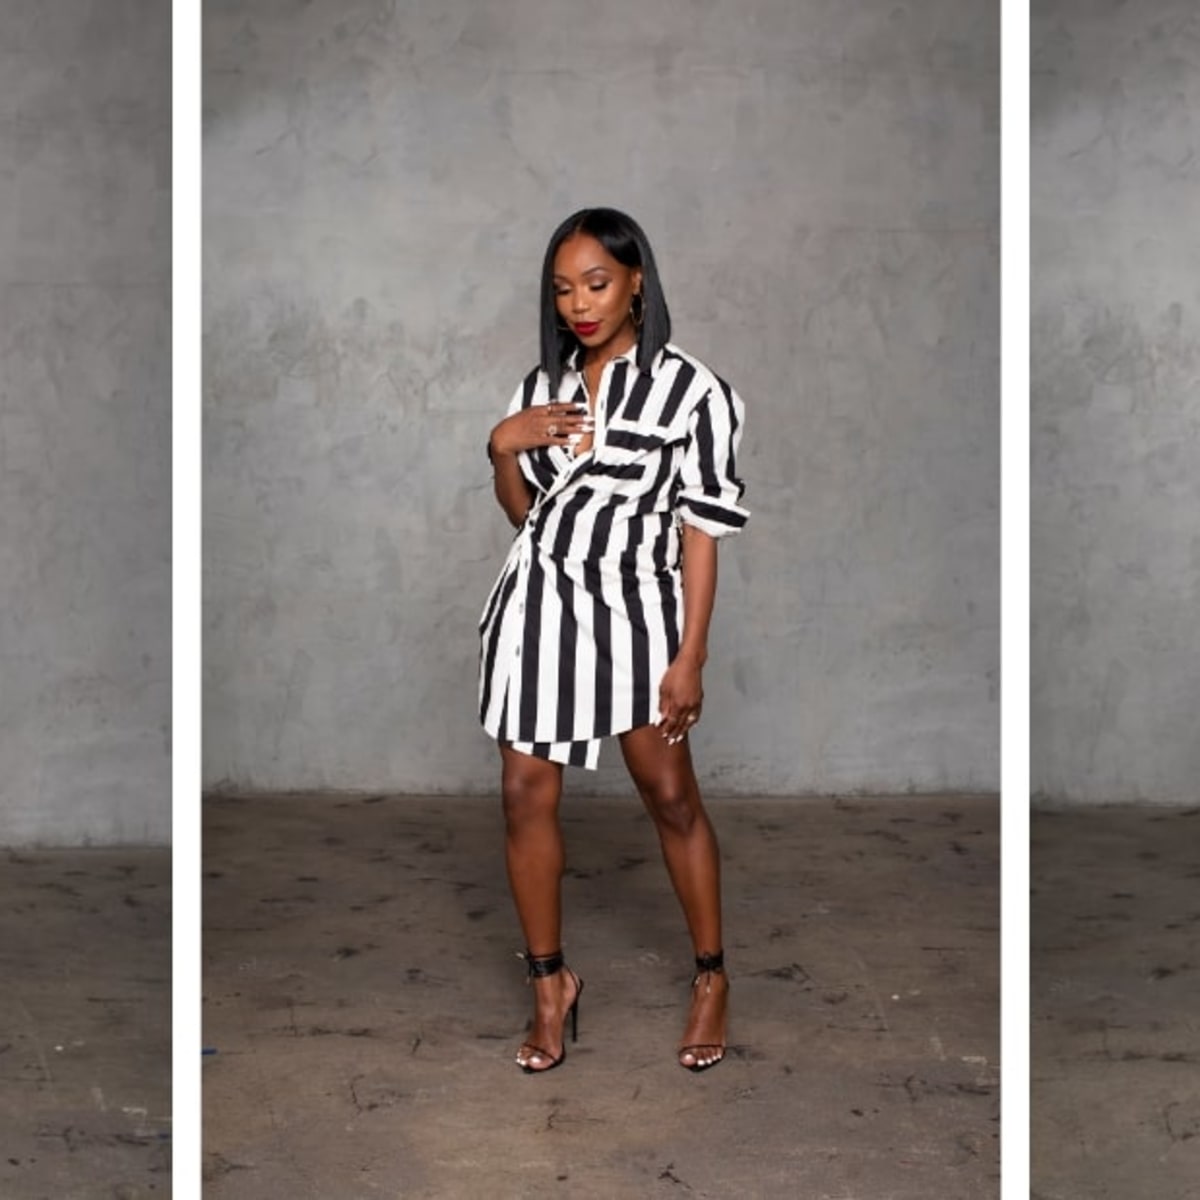 Target's Future Collective First Brand Designer, Kahlana Barfield Brown